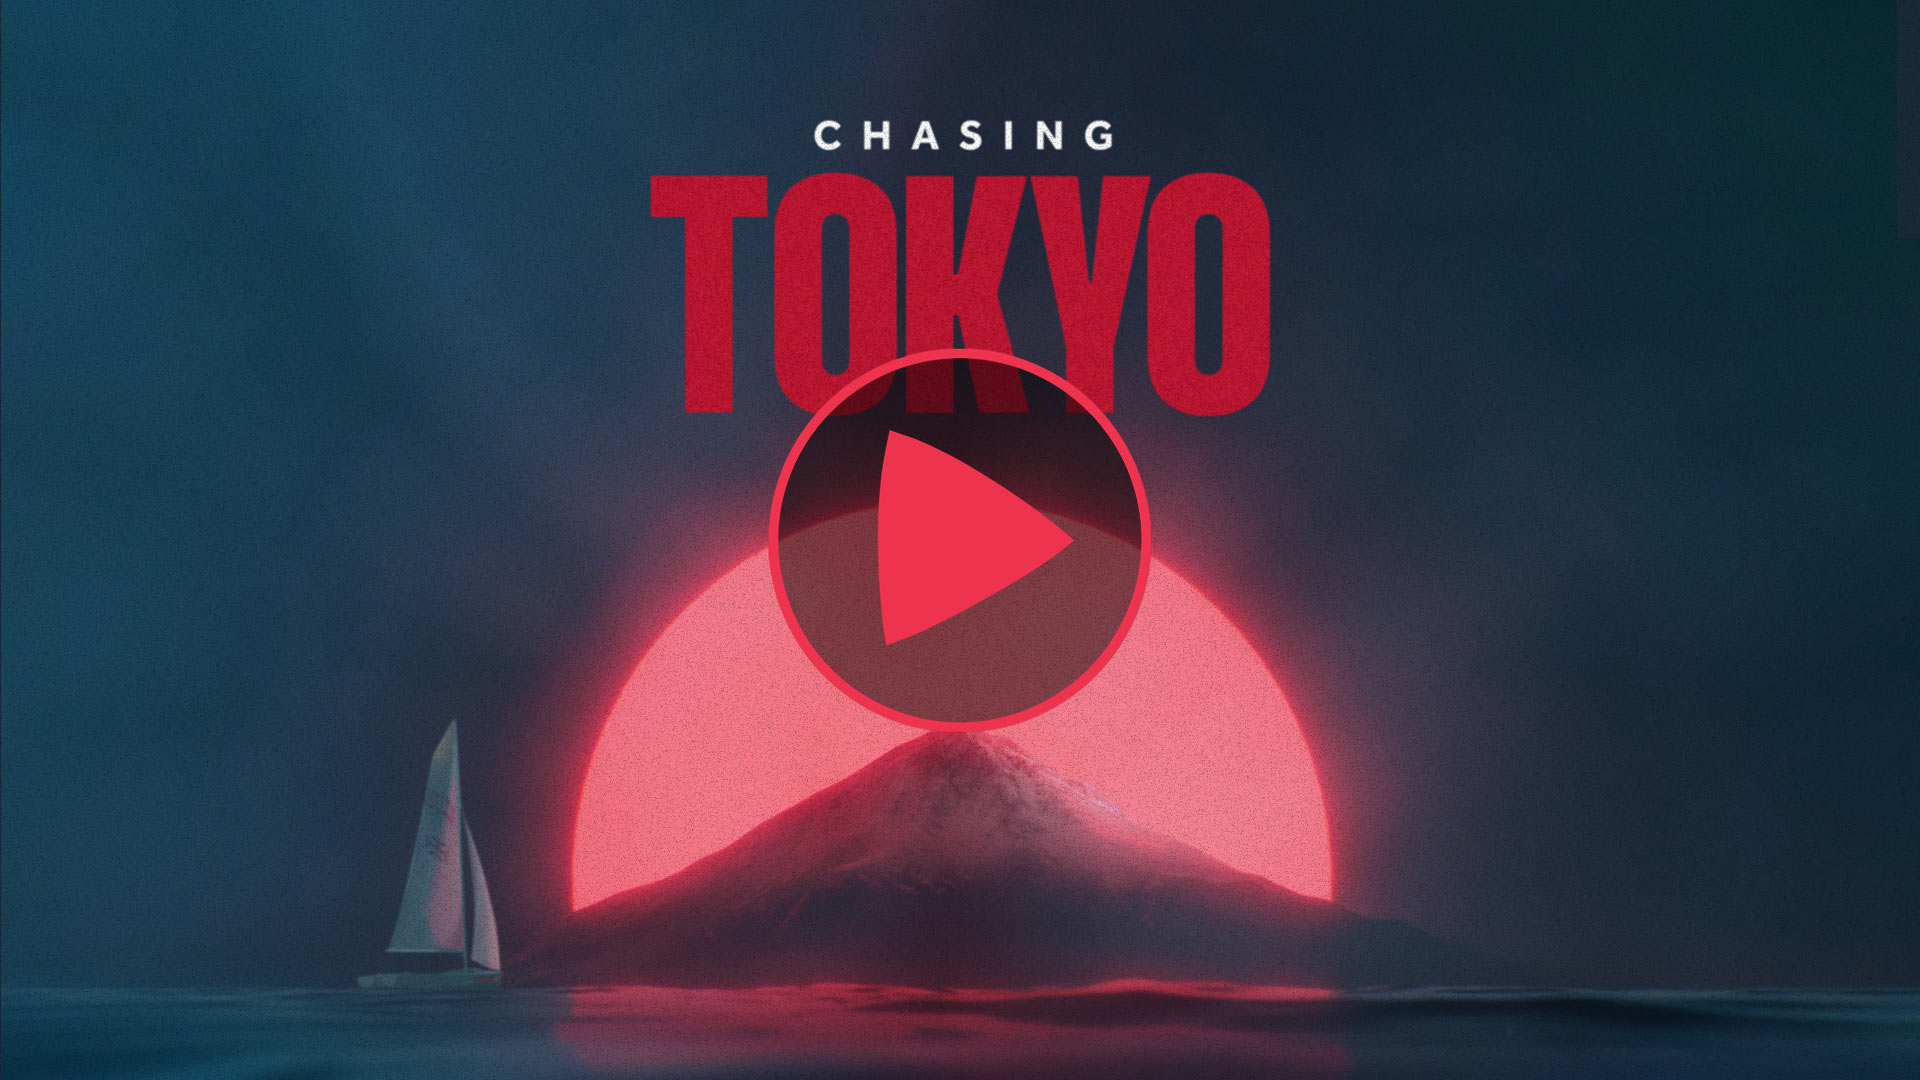 play button for chasing tokyo